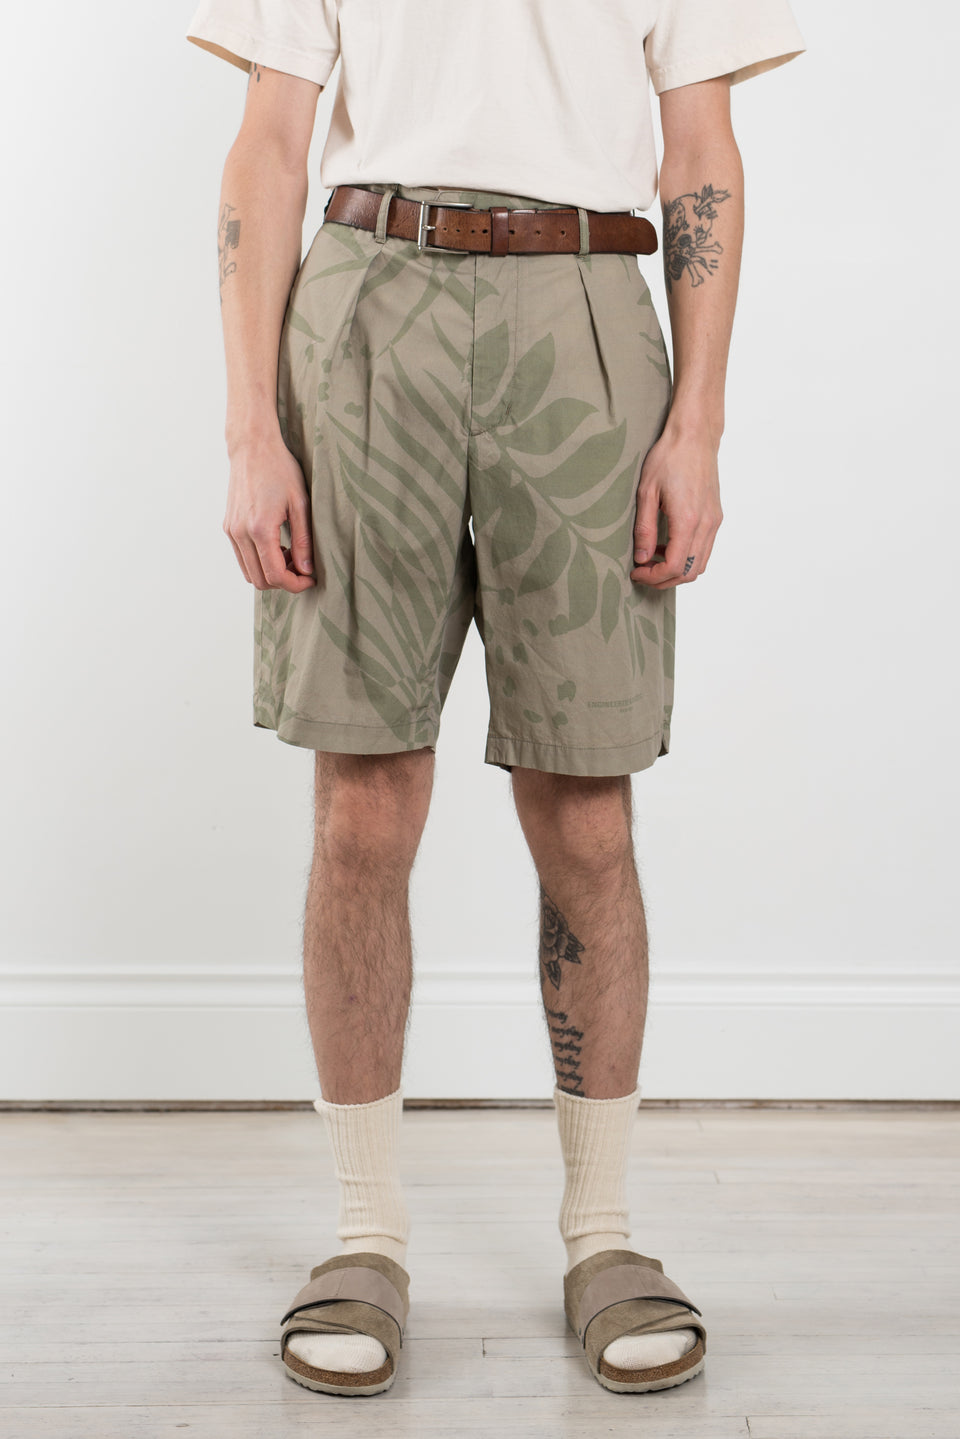 Engineered Garments SS22 Nepenthes New York Sunset Short Khaki / Olive Leaf Print Cotton Poplin Calculus Victoria BC Canada